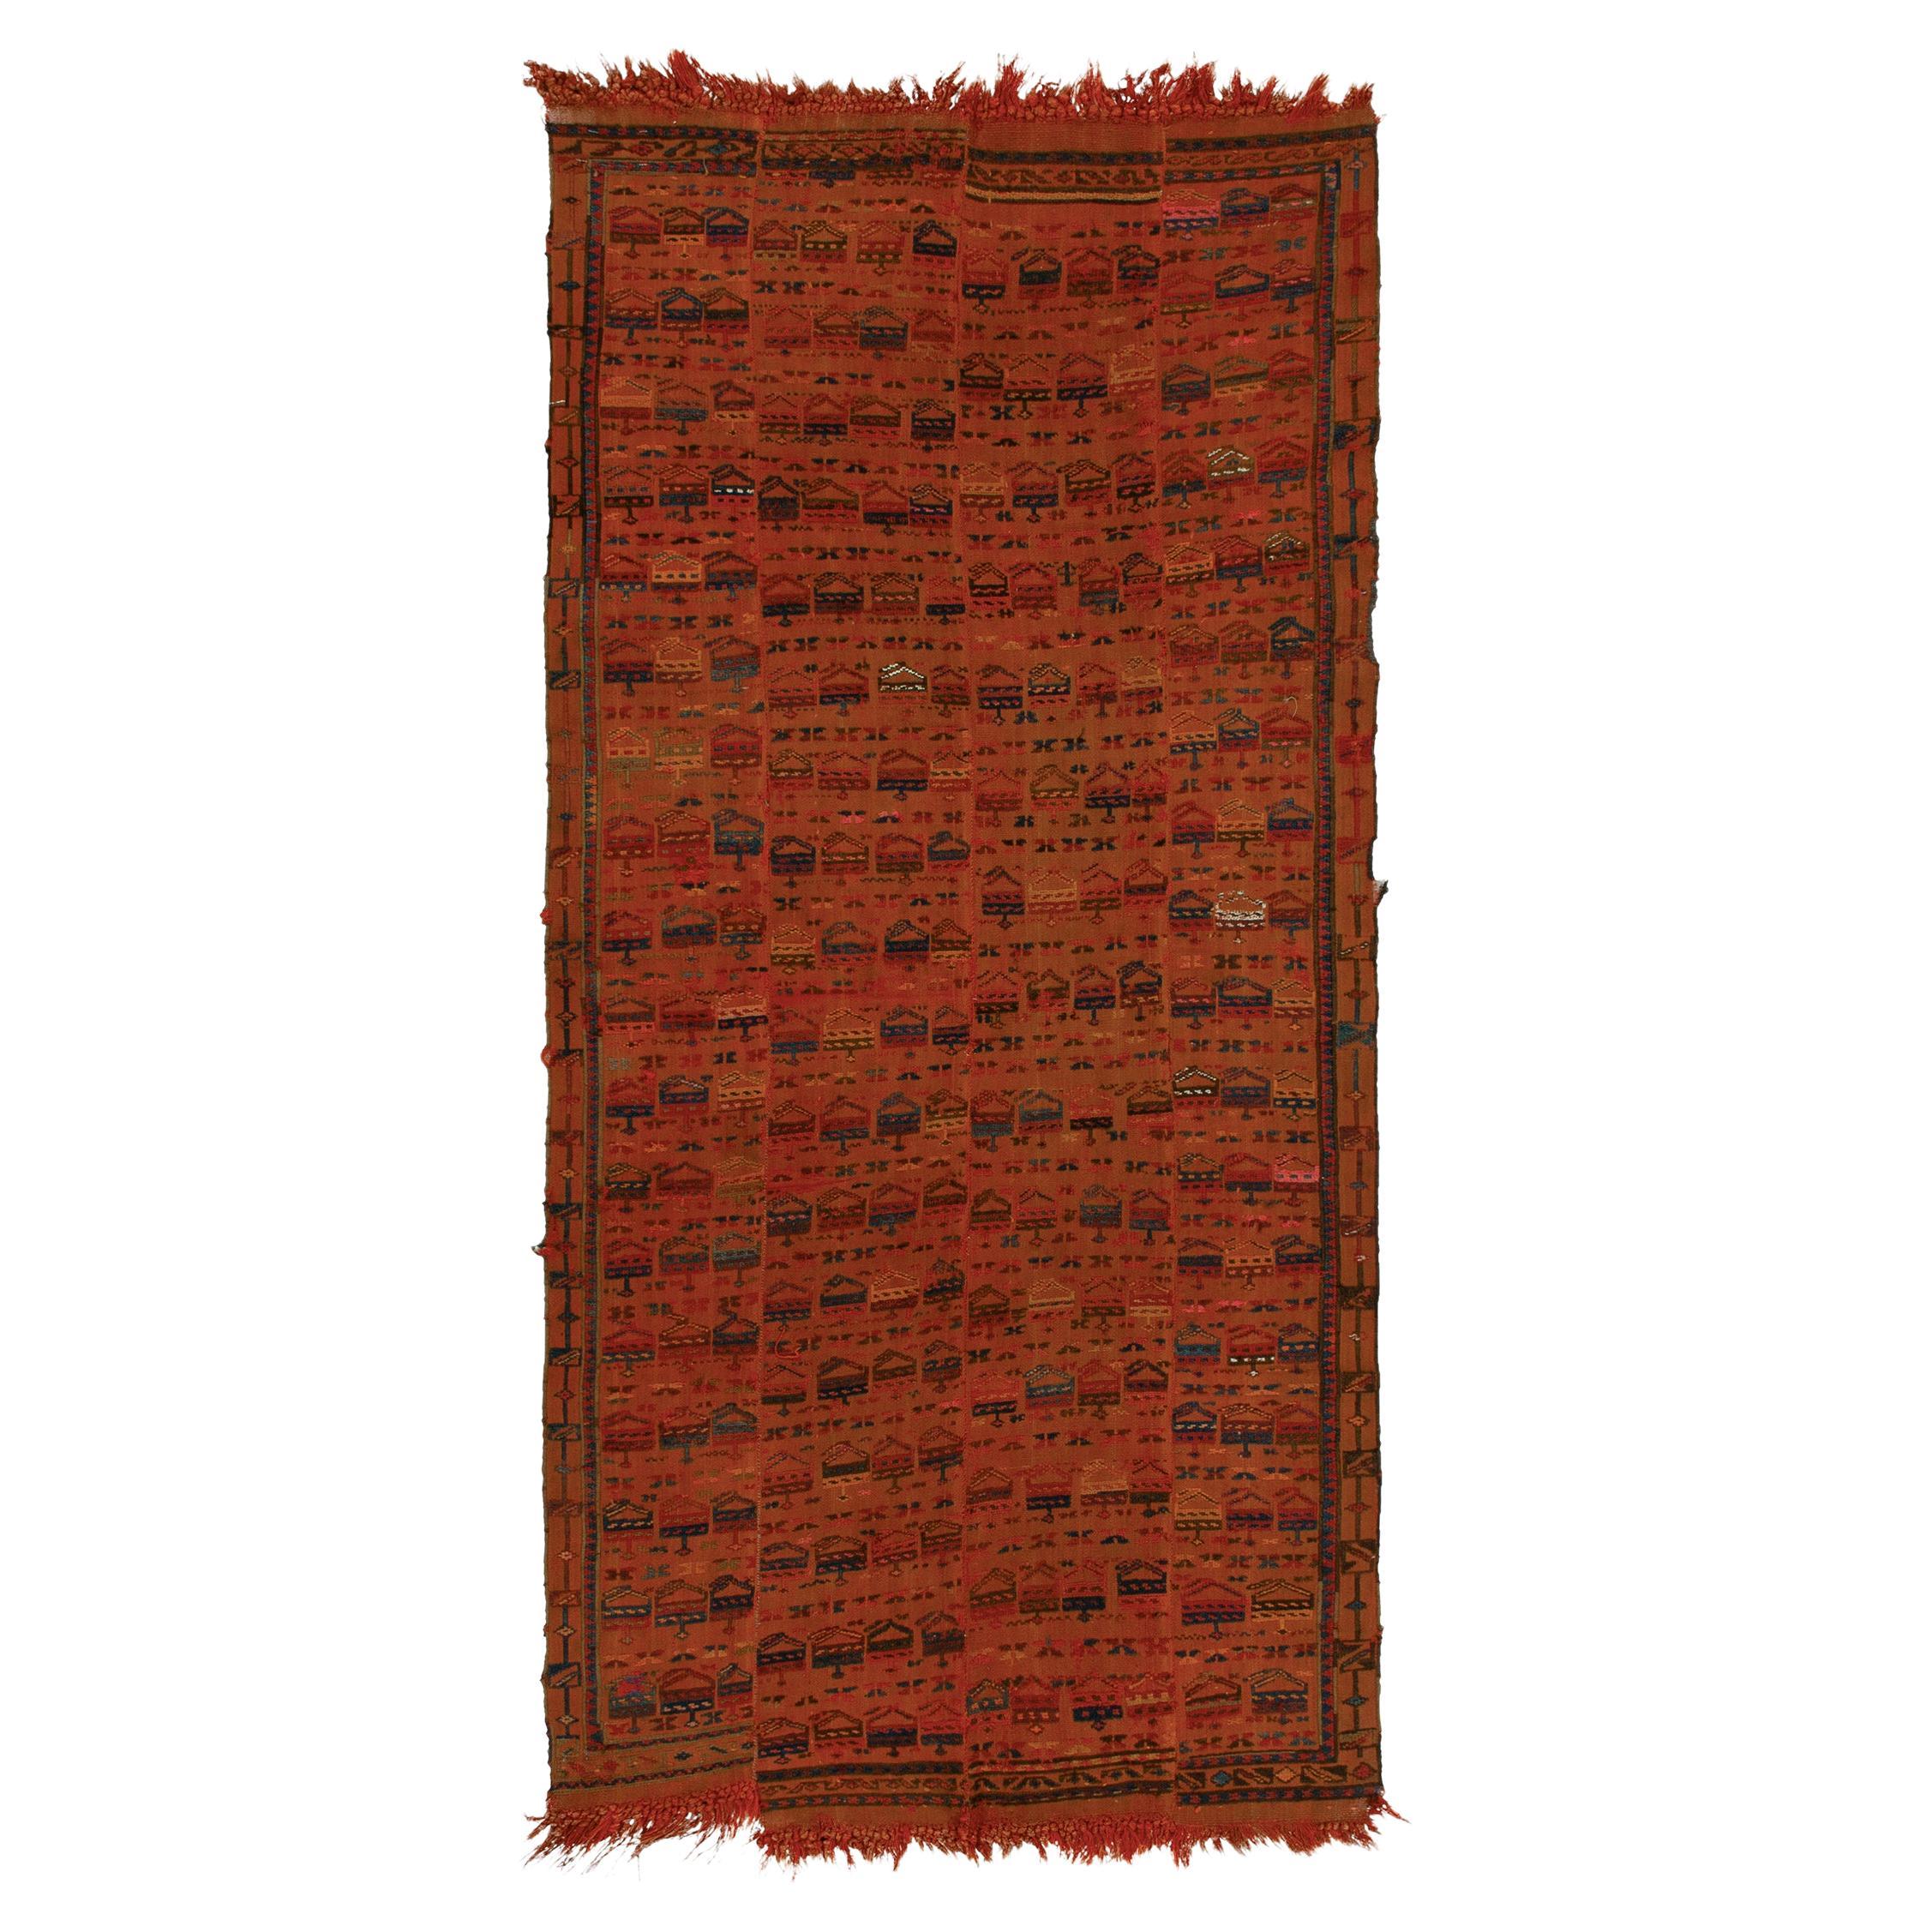 Antique Verneh Kilim in Orange, Blue and Red Geometric patterns by Rug & Kilim For Sale